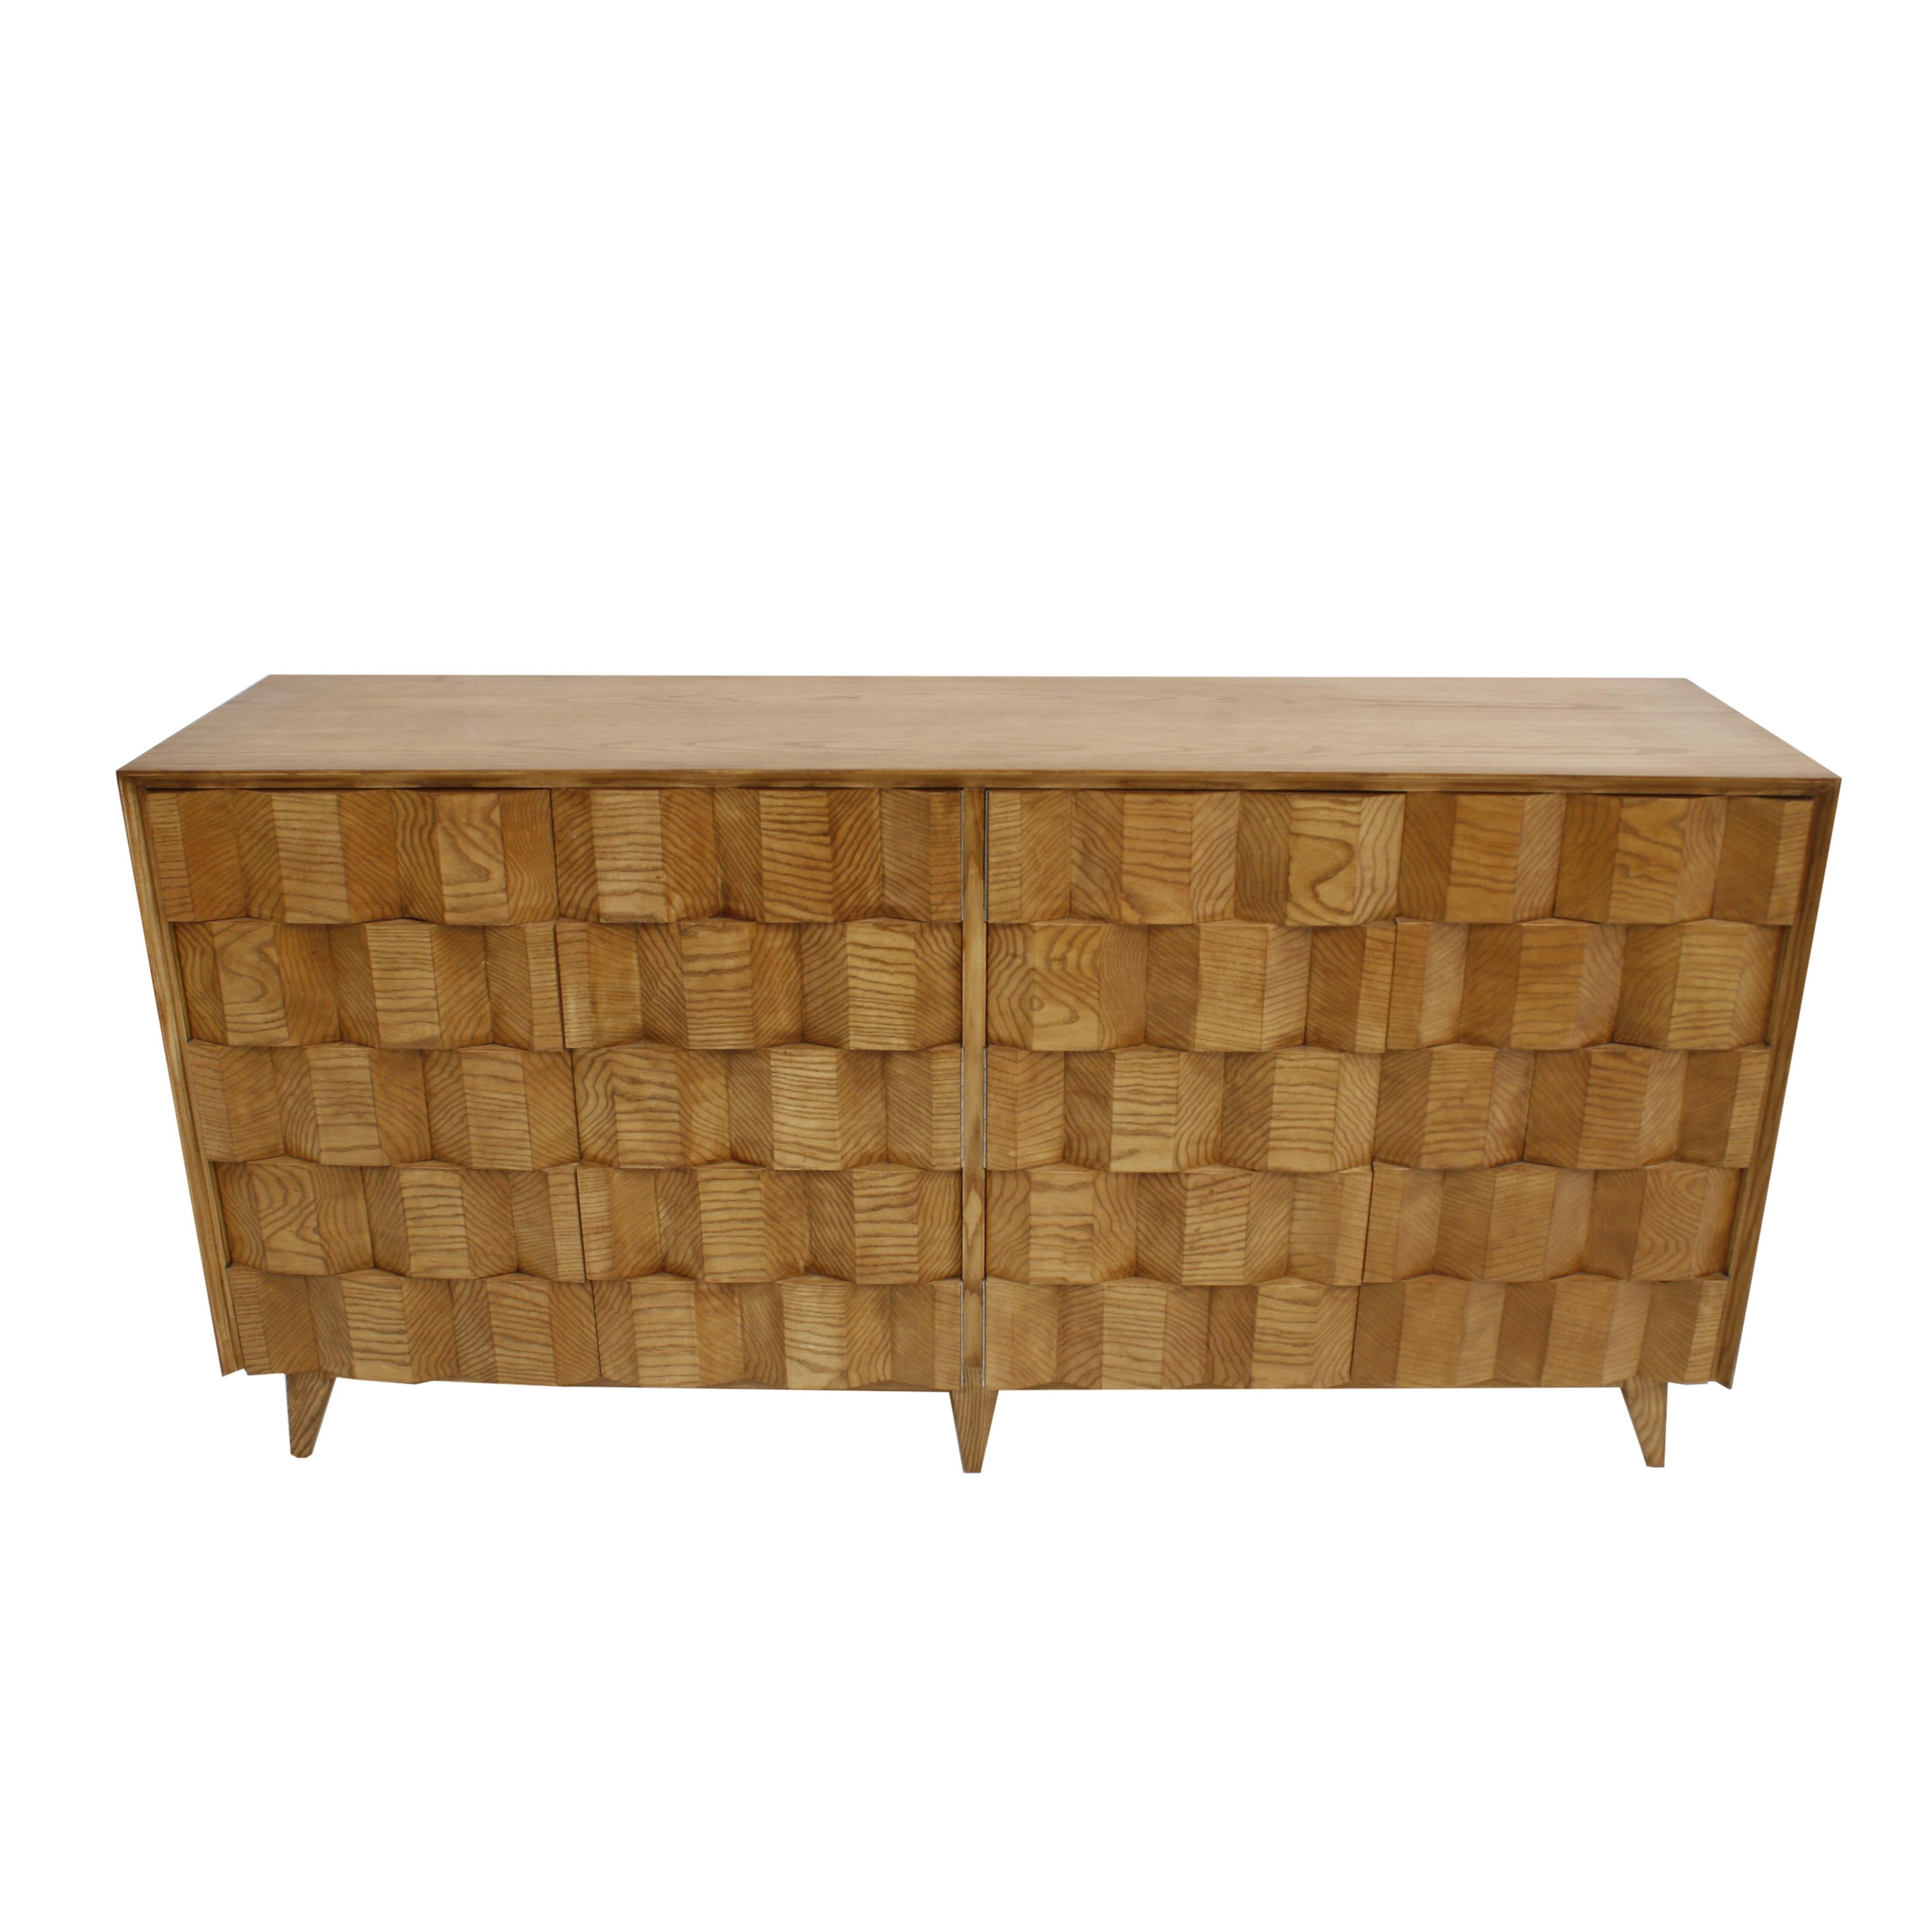 Contemporary faceted Italian sideboard designed by L.A. Studio. Structure made of solid oakwood. Composed of four folding doors with two glass shelves inside. Manufactured in Italy.

Every item LA Studio offers is checked by our team of 10 craftsmen